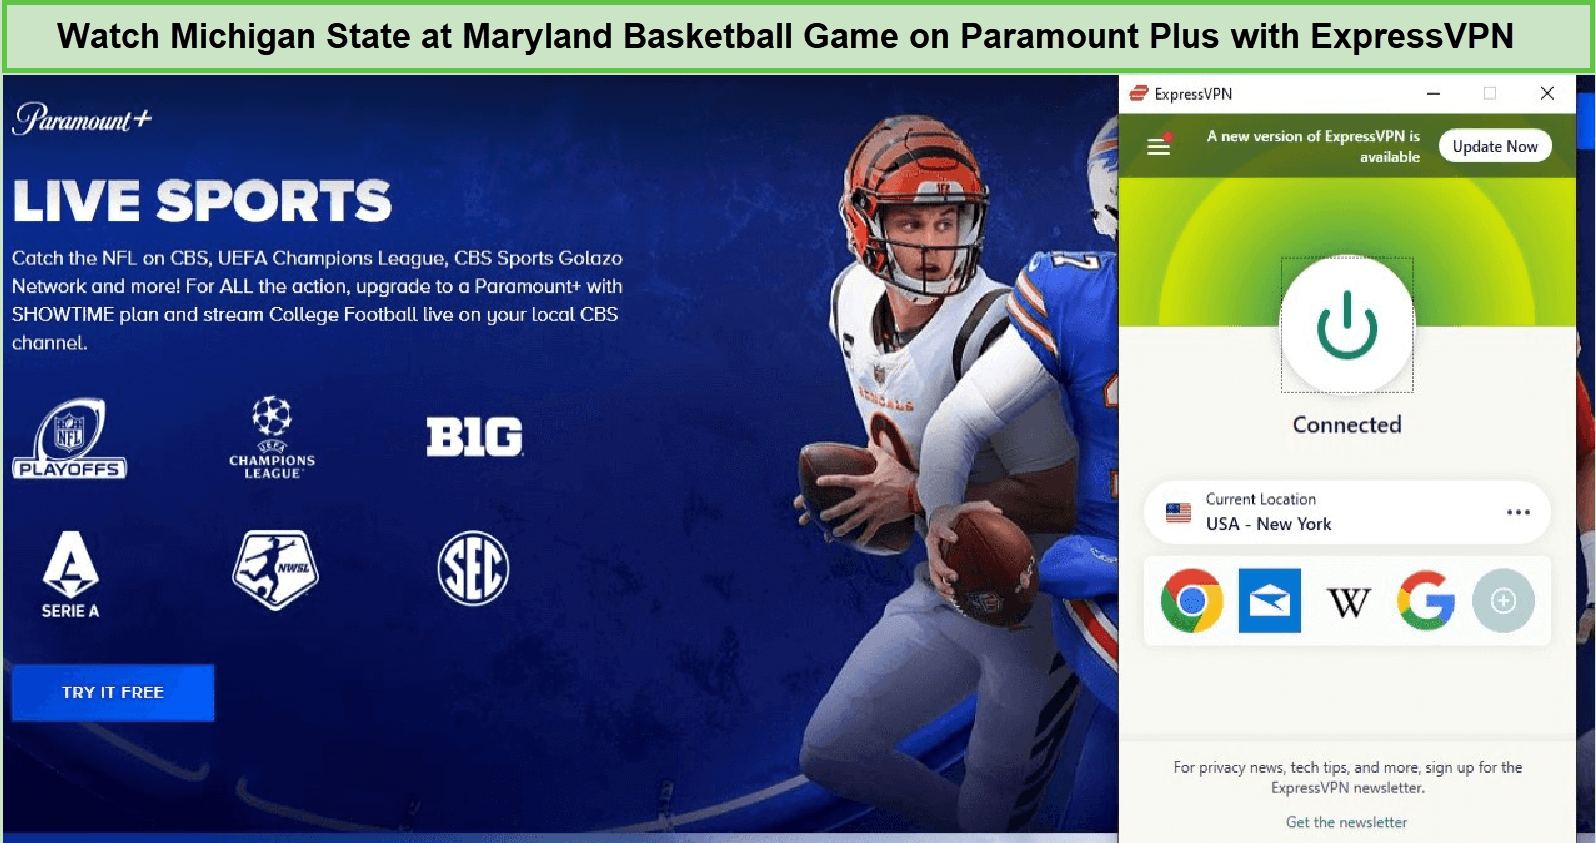 Watch-Michigan-State-at-Maryland-Basketball-Game-in-Hong Kong-on-Paramount-Plus-with-ExpressVPN